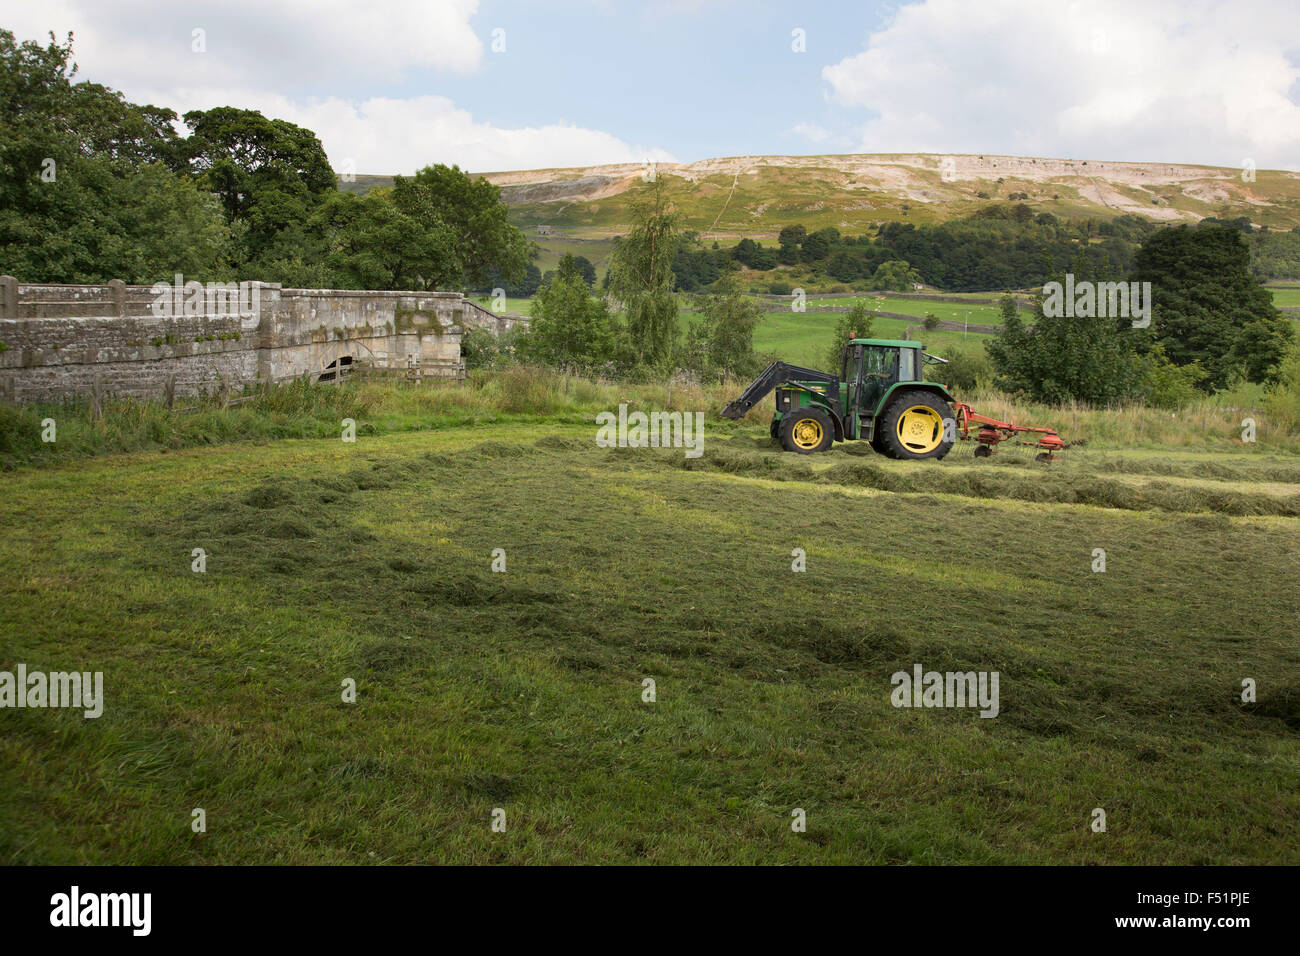 Farmer using a tractor to gather hay on the last day before rain is expected in his field in Reeth at Swaledale. Yorkshire, England, UK. This is a farming area where rural living and the countryside is at the centre of life in this county. Swaledale runs broadly from west to east. To the south and east of the ridge a number of smaller dales. Swaledale is a typical limestone Yorkshire dale, with its narrow valley-bottom road, green meadows and fellside fields, white sheep and dry stone walls on the glacier-formed valley sides, and darker moorland skyline. Stock Photo